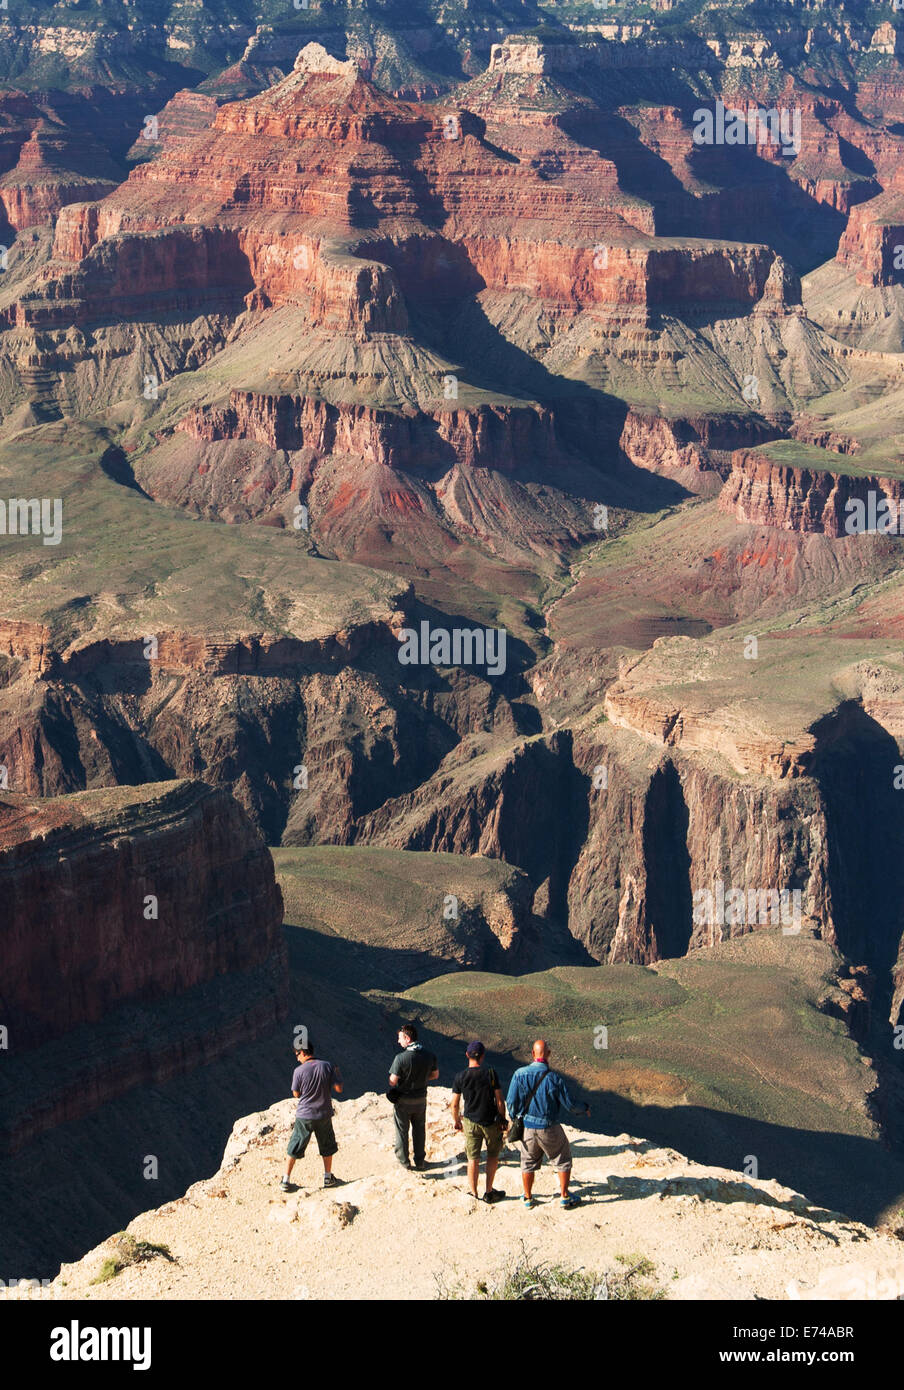 Men standing on edge of rock precipice overlooking Grand Canyon. Stock Photo